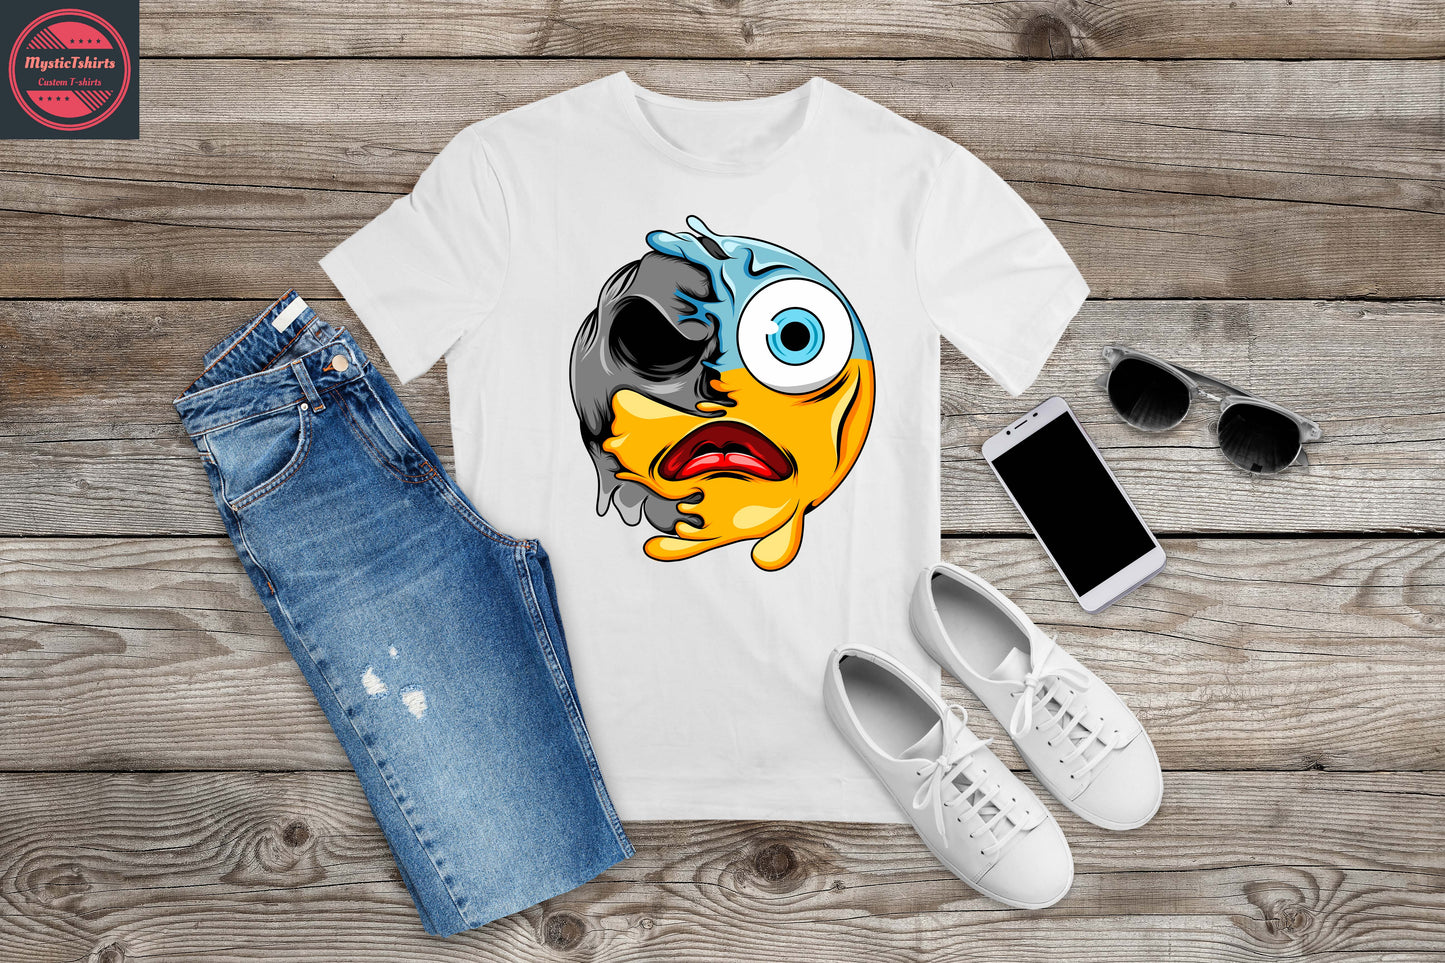 097. CRAZY FACE, Personalized T-Shirt, Custom Text, Make Your Own Shirt, Custom Tee